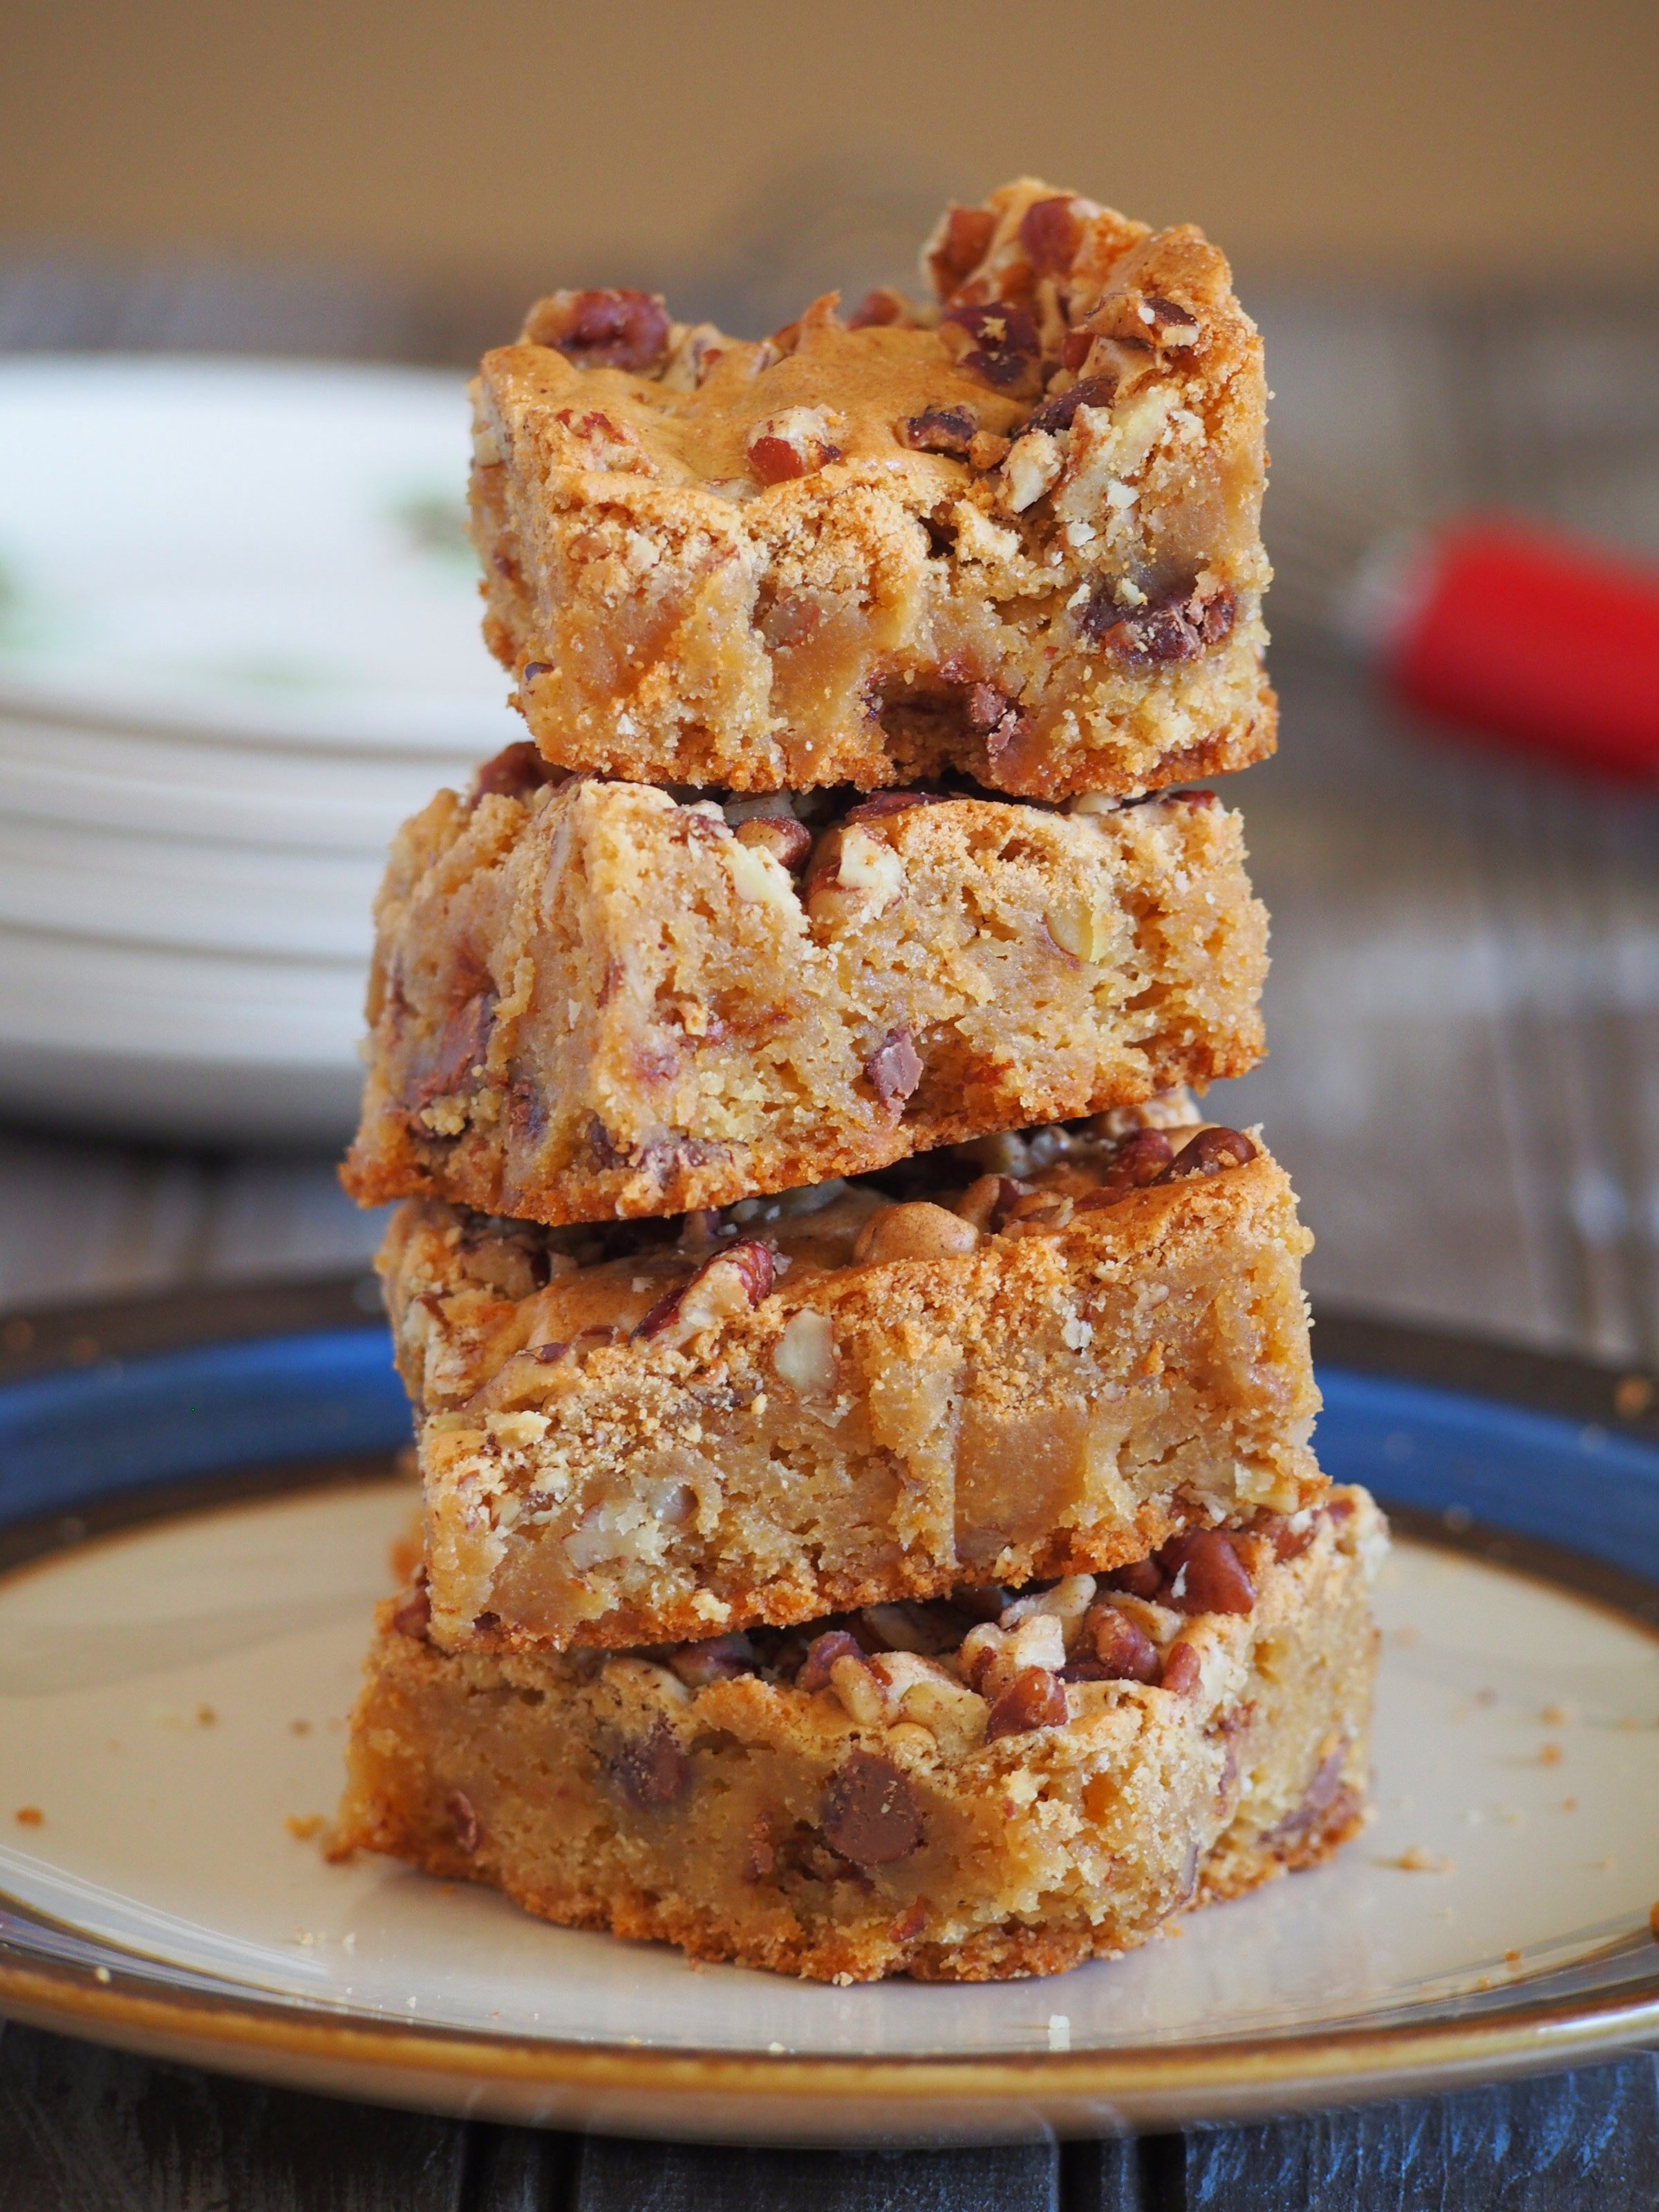 Enjoy these chewy butterscotch bars studded with crunchy pecans and delightful chocolate chips. Best things to munch anytime, anywhere.